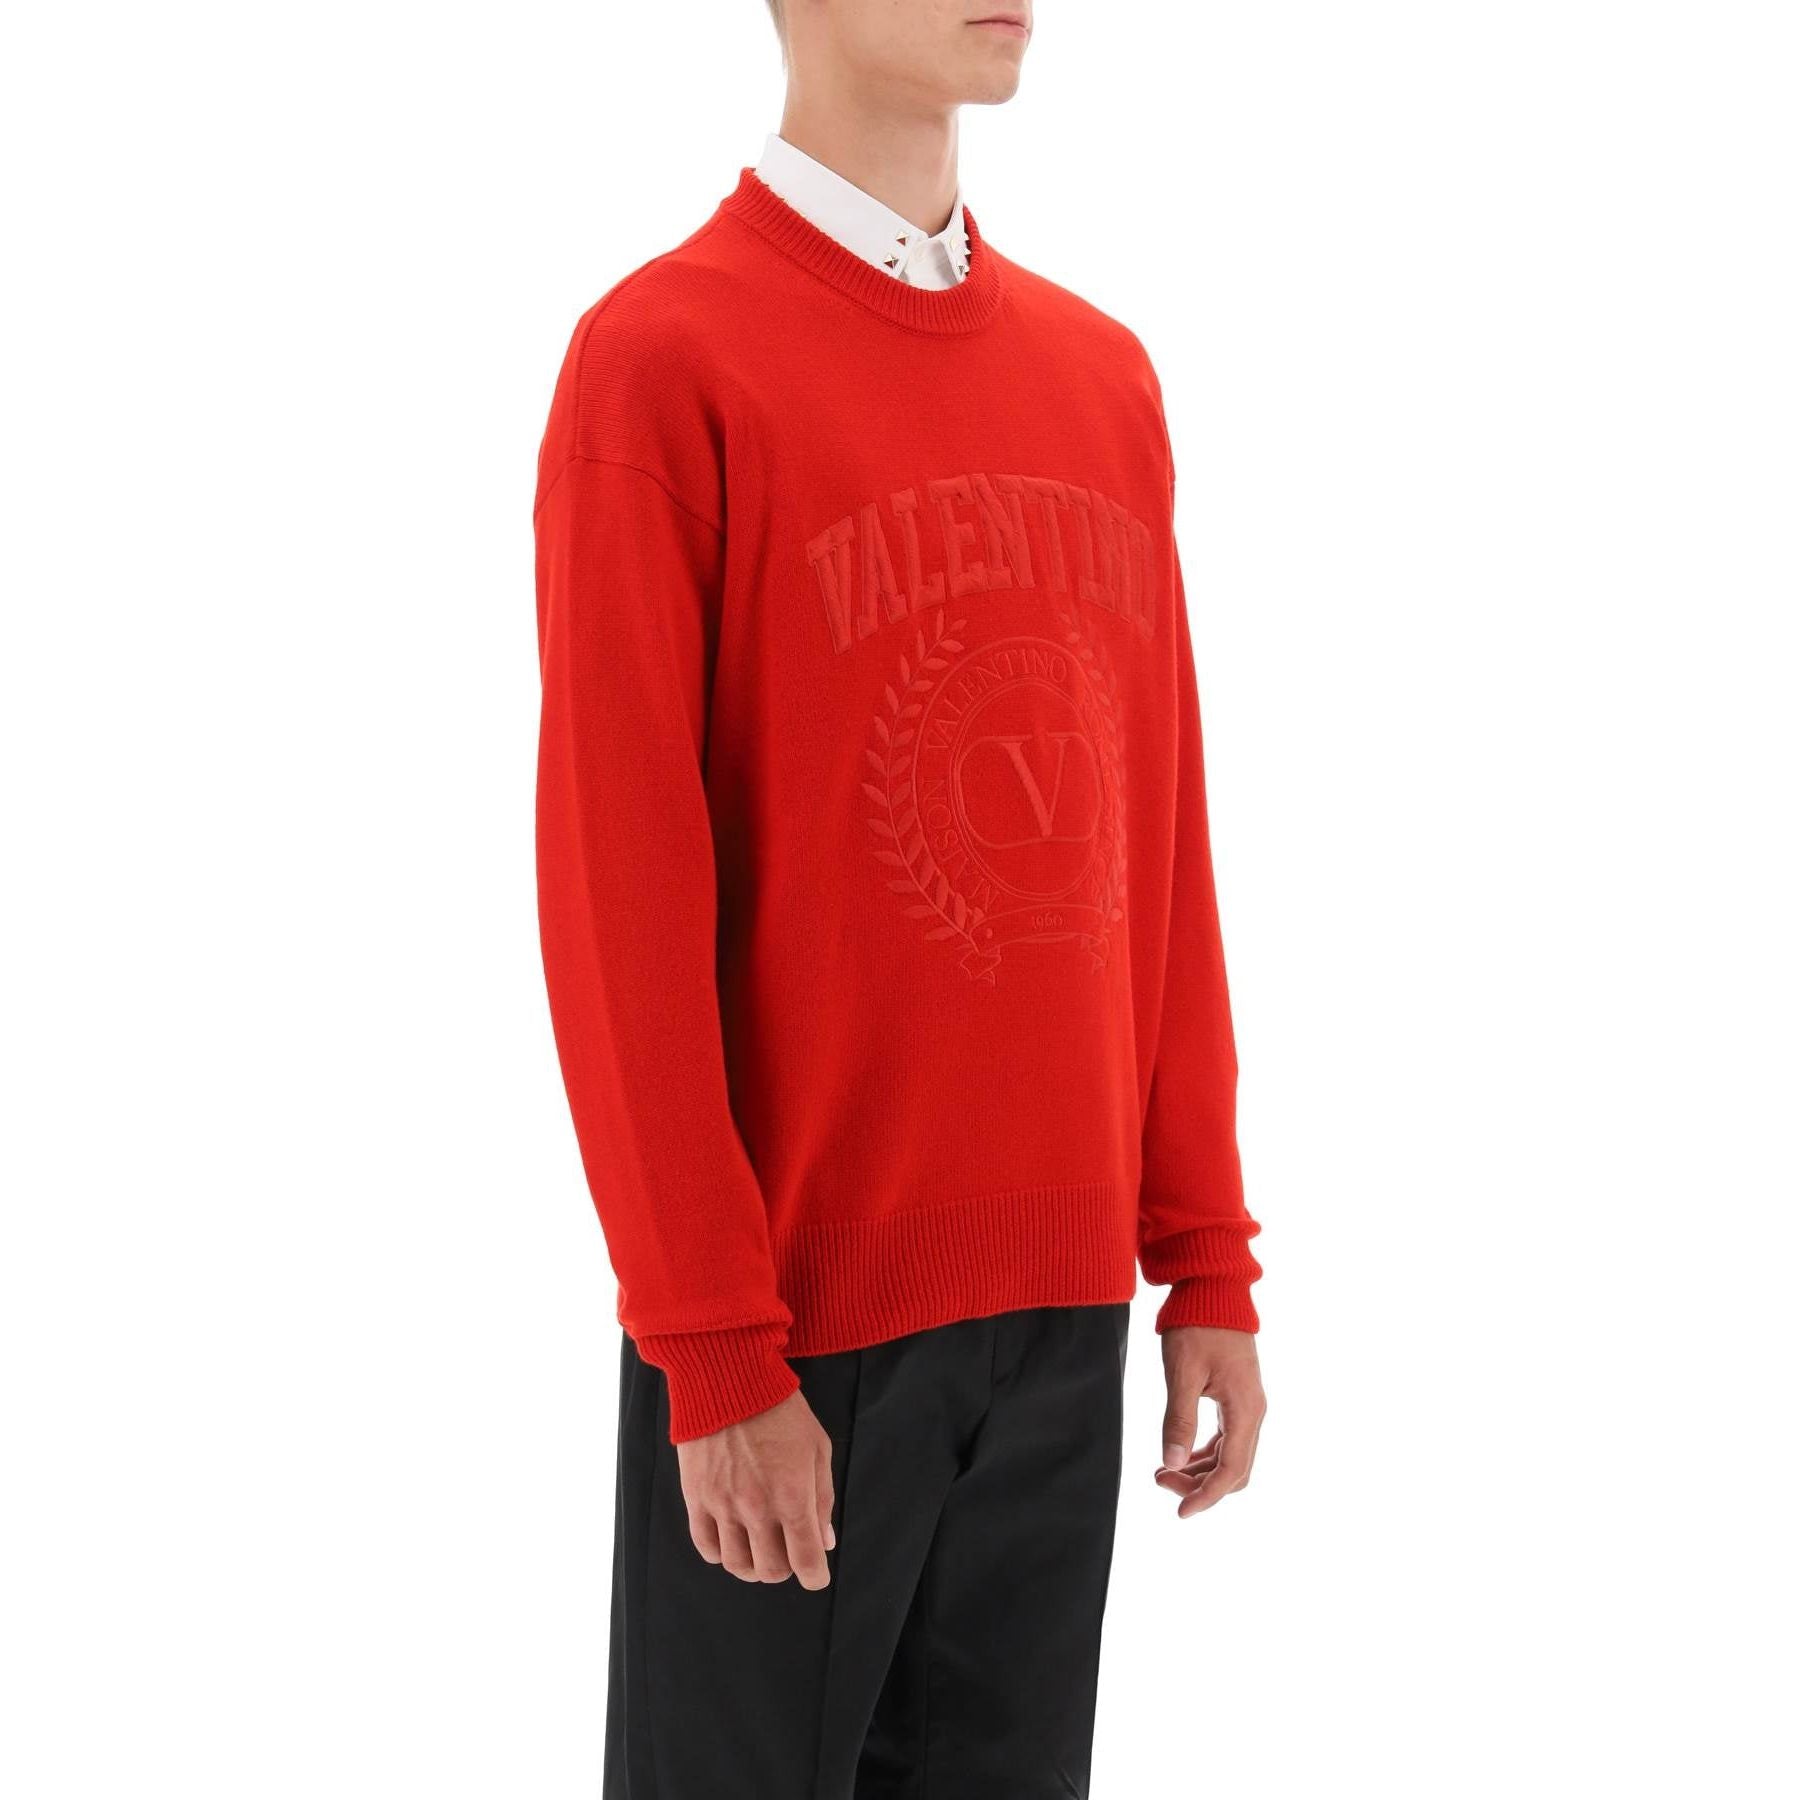 Crew Neck Sweater With Maison Valentino Embroidery